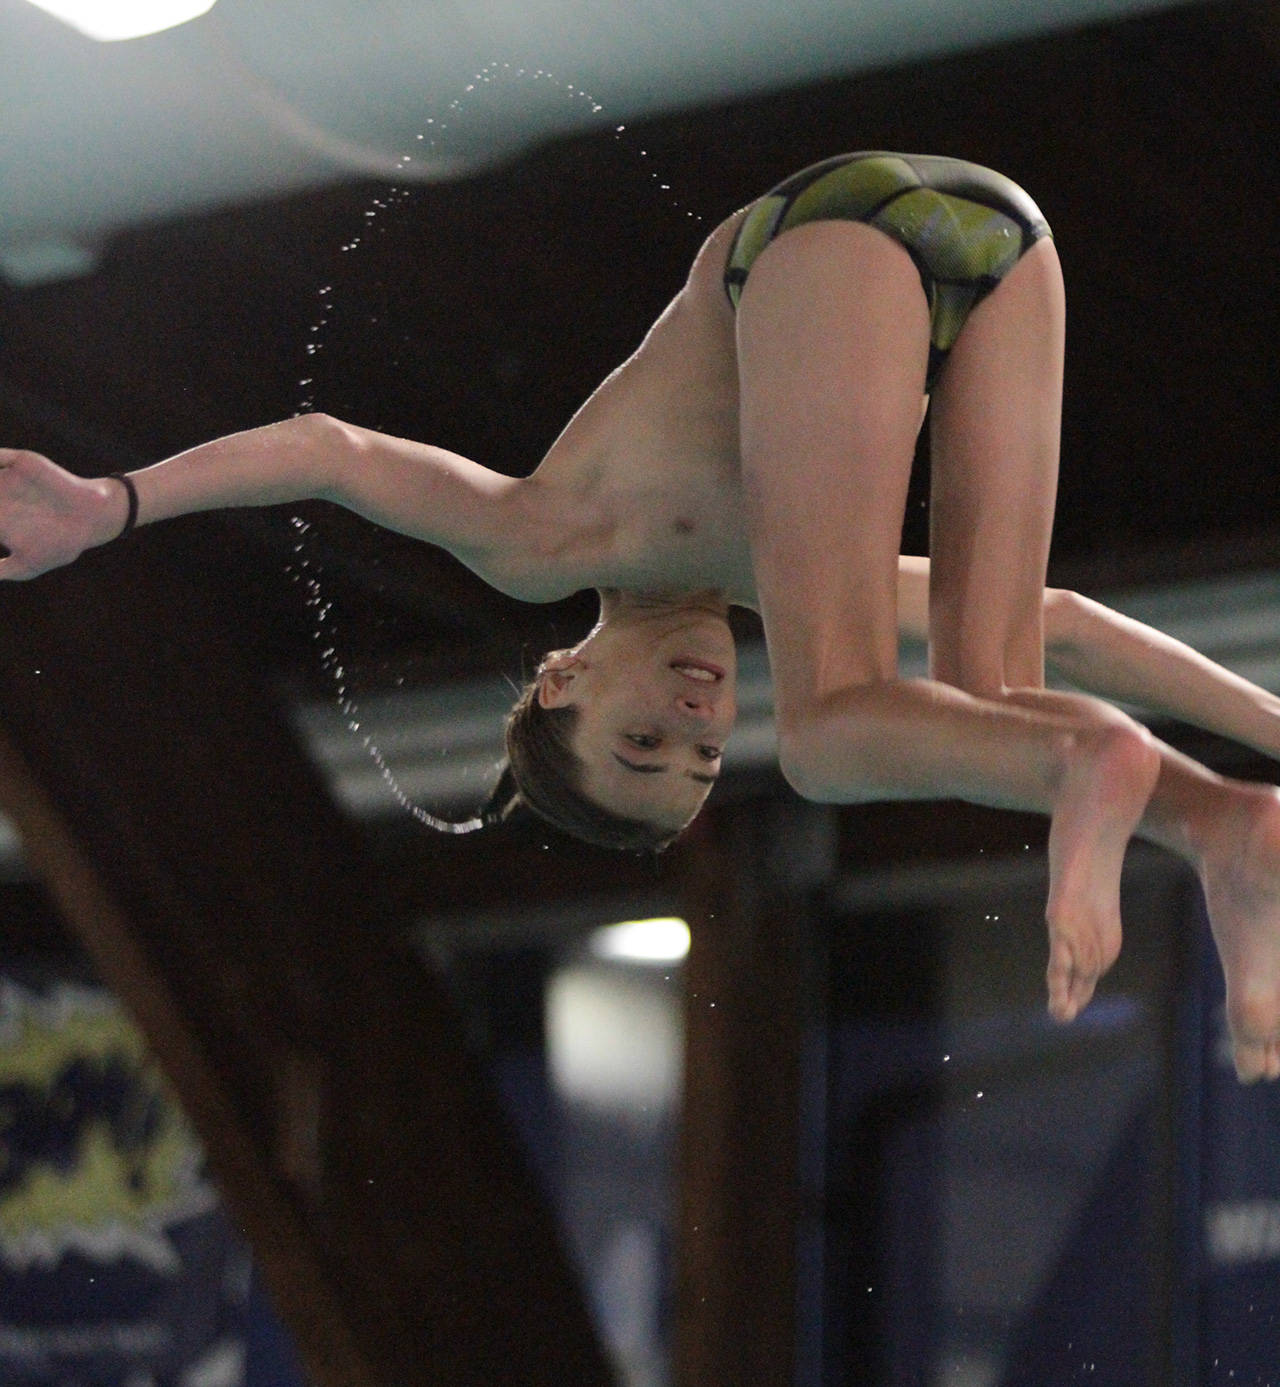 Carter Ragan competes in 1-meter diving for the Spartans in their matchup against Lakeside. (Brian Kelly | Bainbridge Island Review)